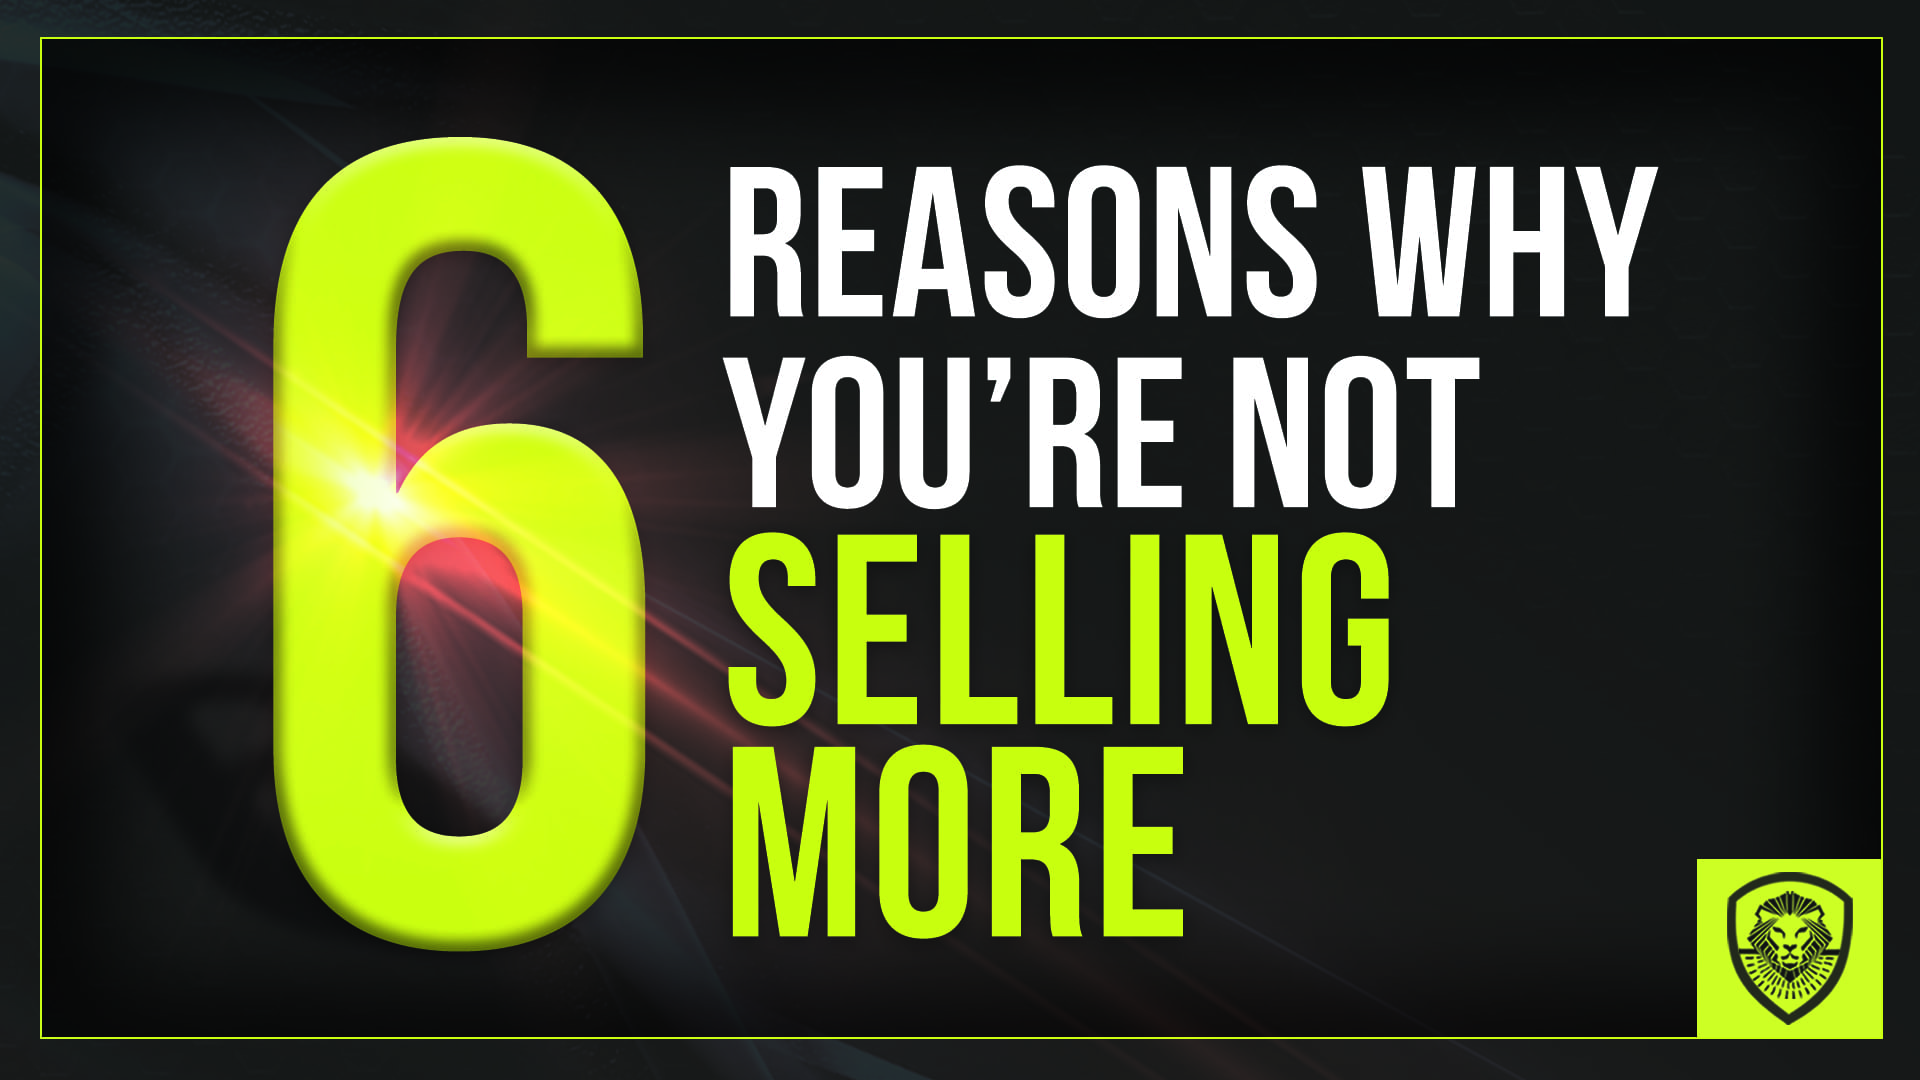 6 Reasons Why You're not Selling More